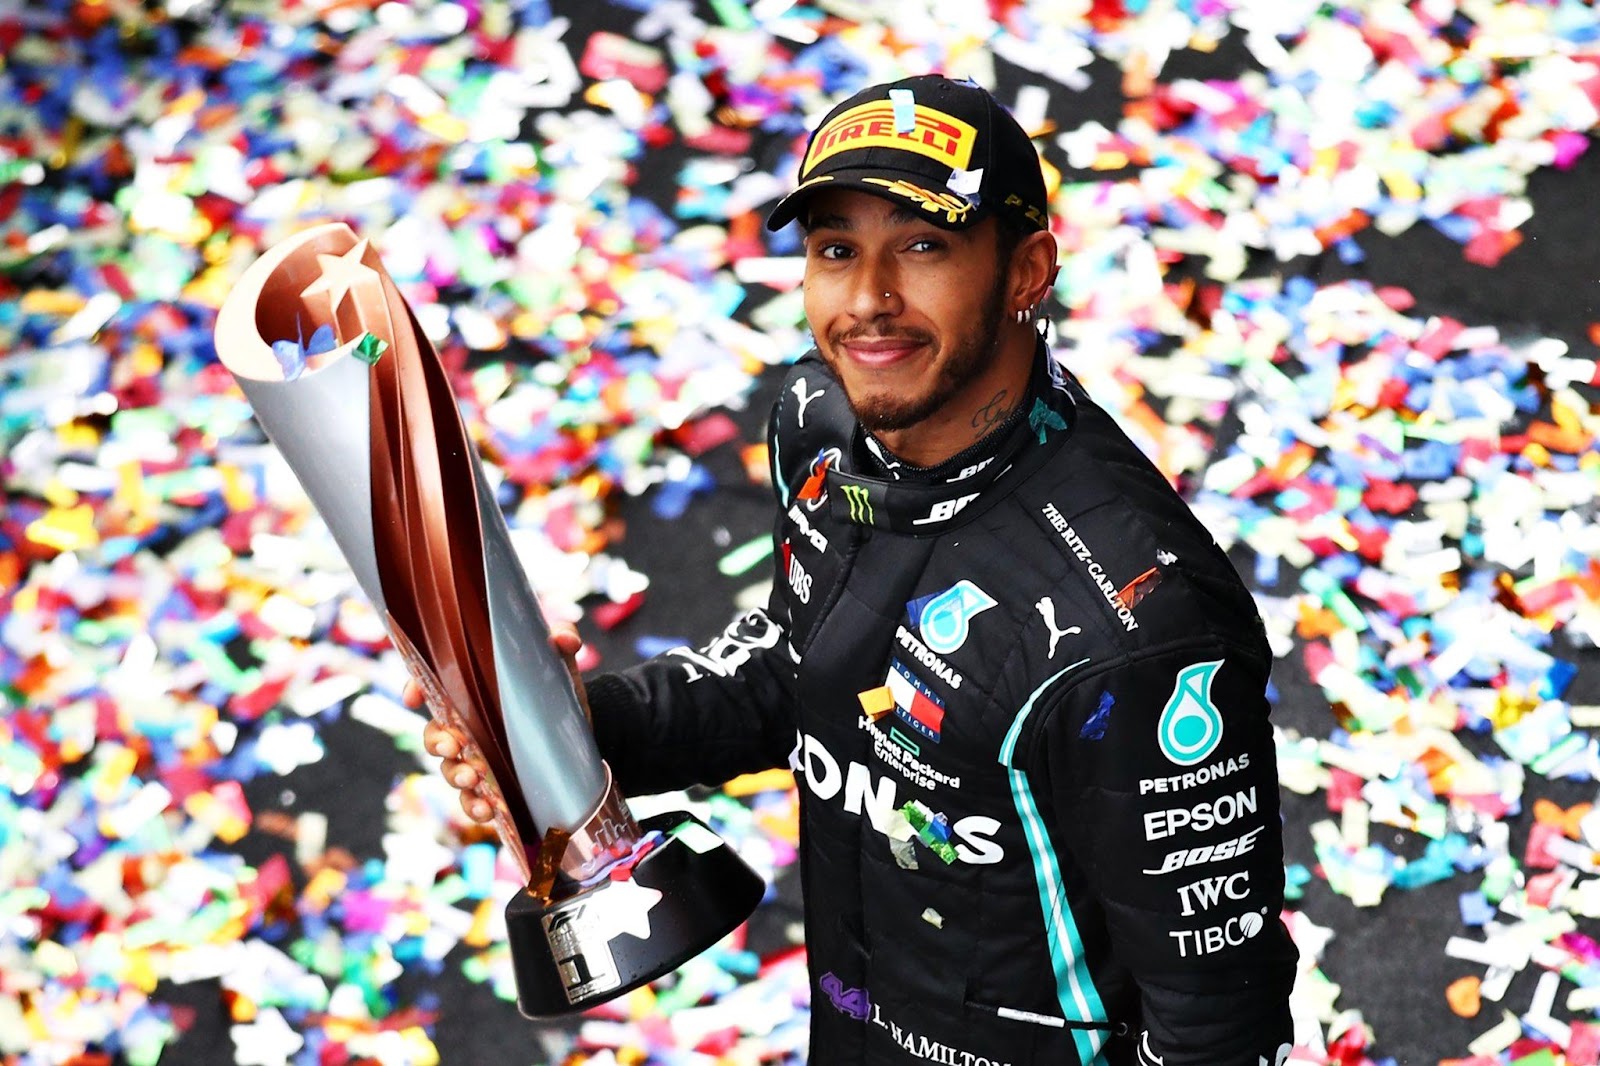 Lewis Hamilton Equals Michael Schumer’s Seven World Career Titles Record as He Finishes Top at the Turkish Grand Prix 2020.